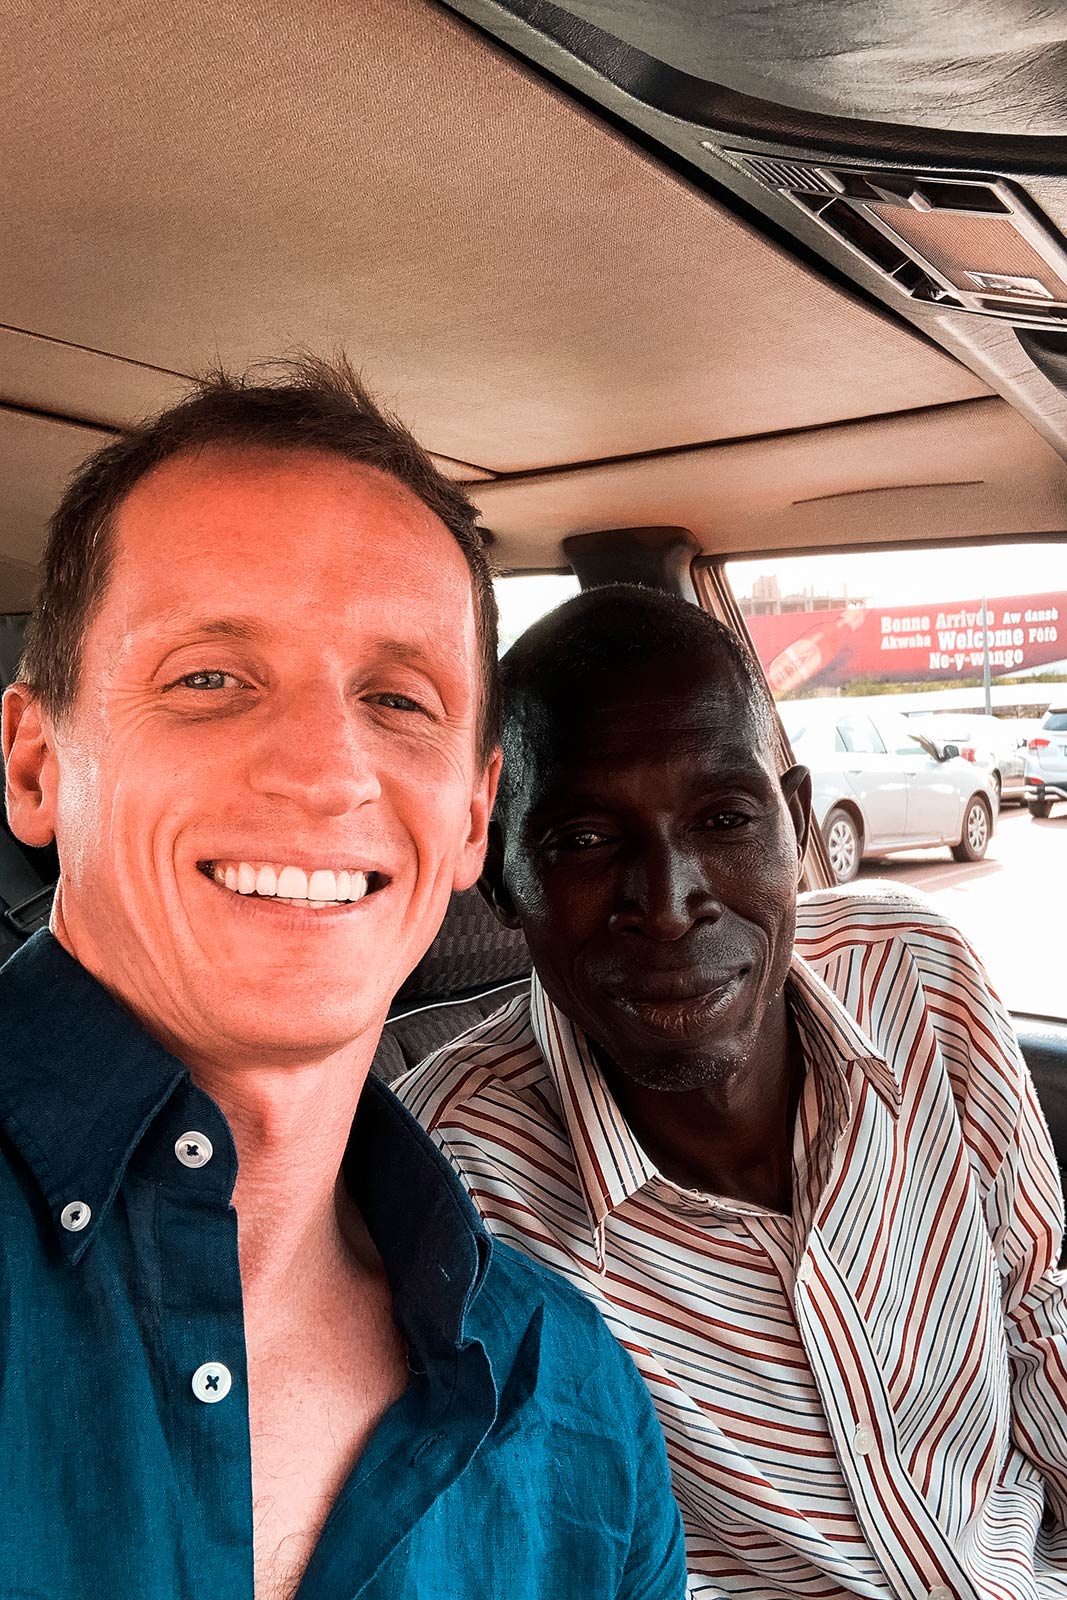 David Simpson and taxi driver in Niger. Negotiating with taxi drivers in Niger